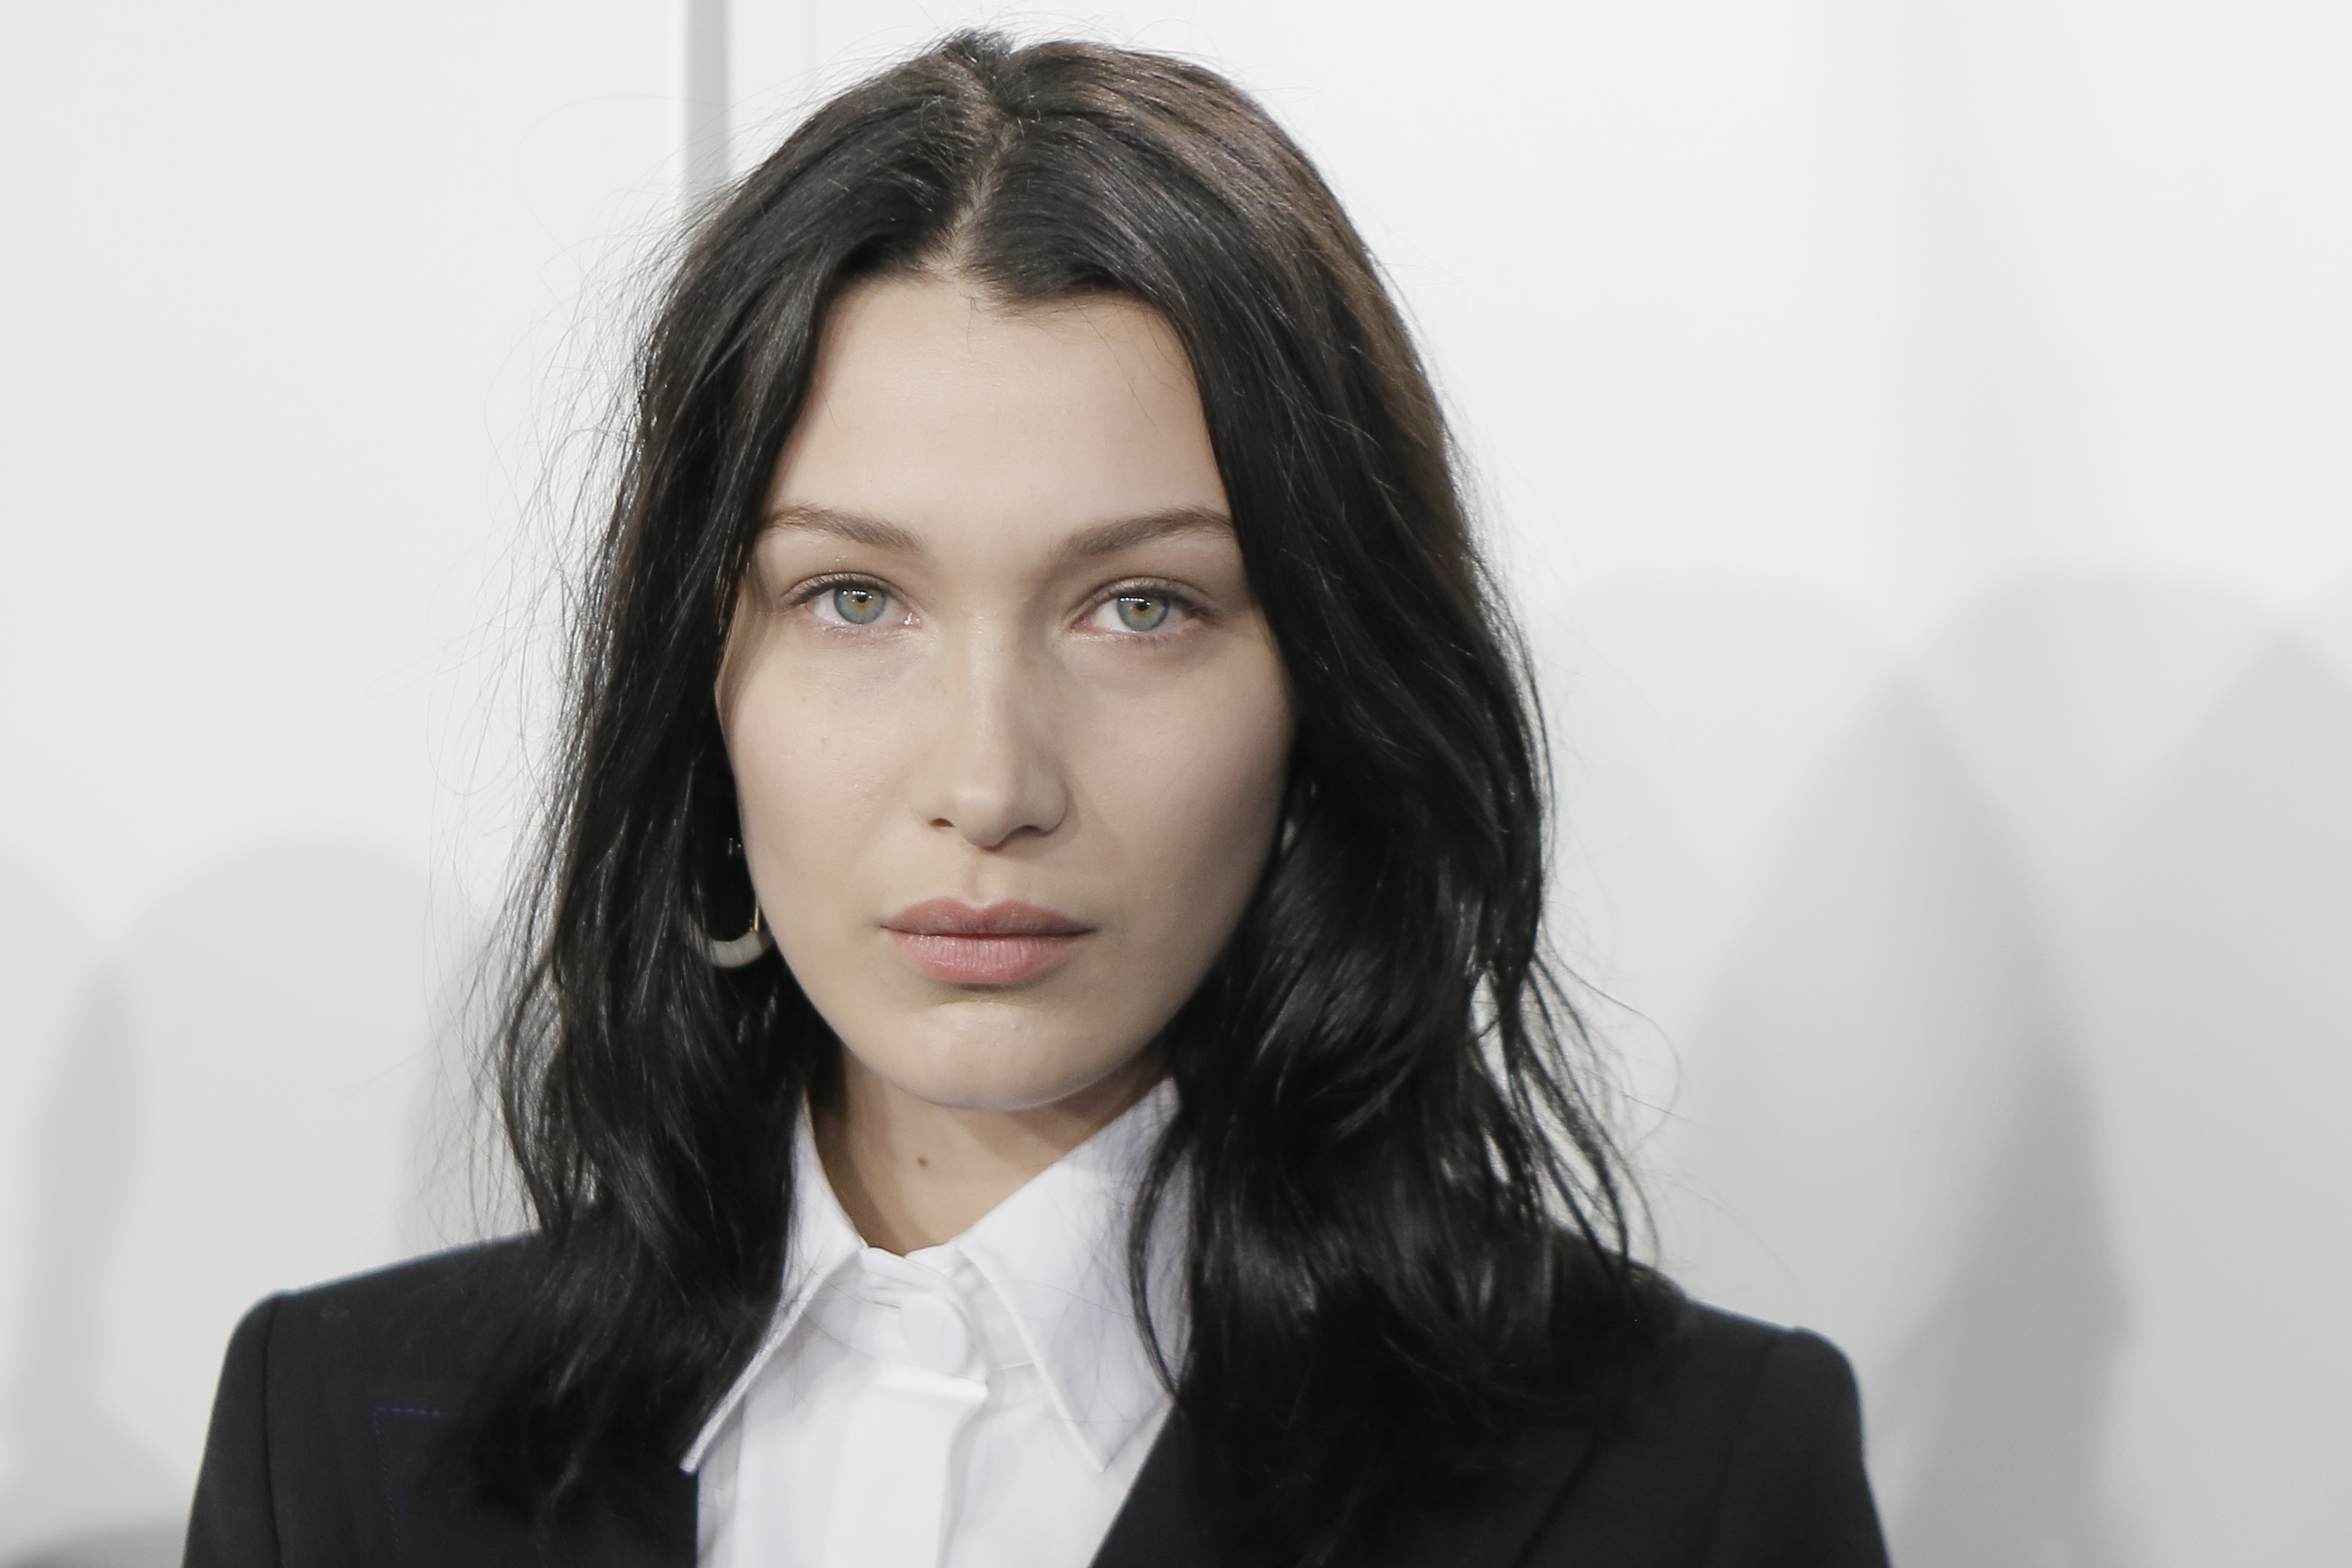 MILAN, ITALY - FEBRUARY 23:  Model Bella Hadid, beauty backstage detail, is seen backstage ahead of the Fendi show during Milan Fashion Week  Fall/Winter 2017/18 on February 23, 2017 in Milan, Italy. (Photo by Lorenzo Palizzolo/Getty Images) (Lorenzo Palizzolo&mdash;Getty Images)